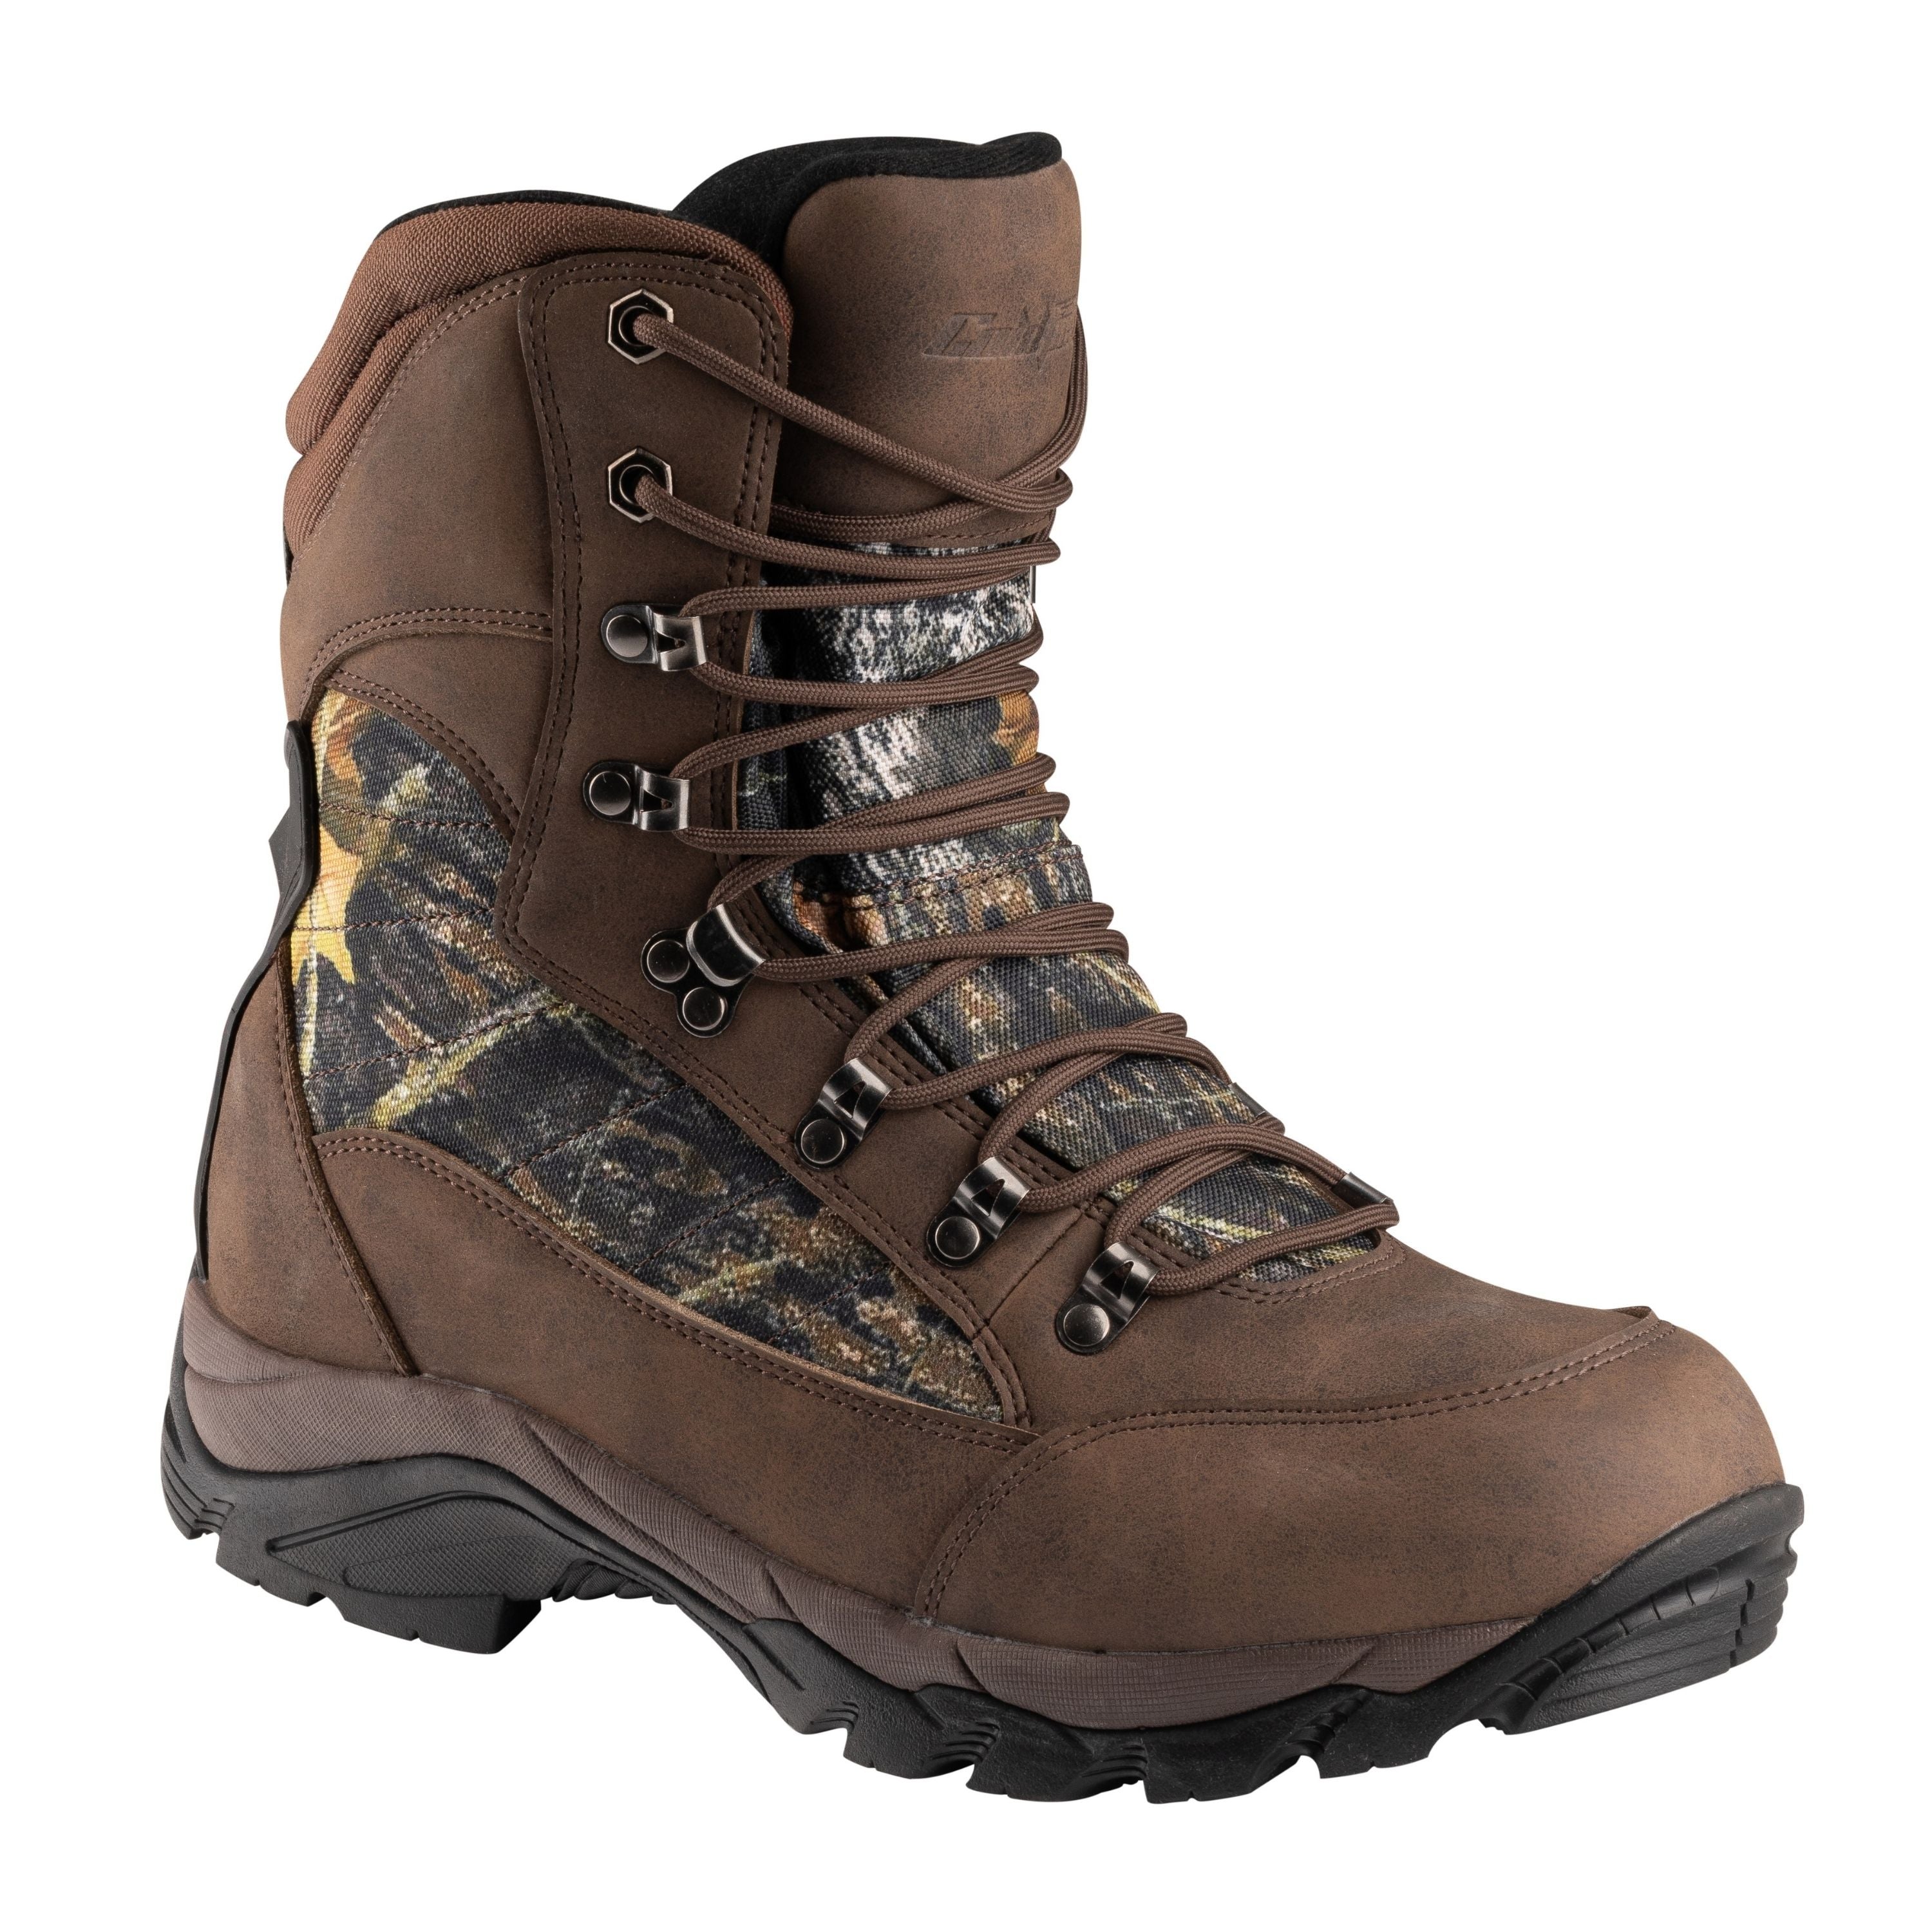 "Summit" Thinsulate boots - Men’s